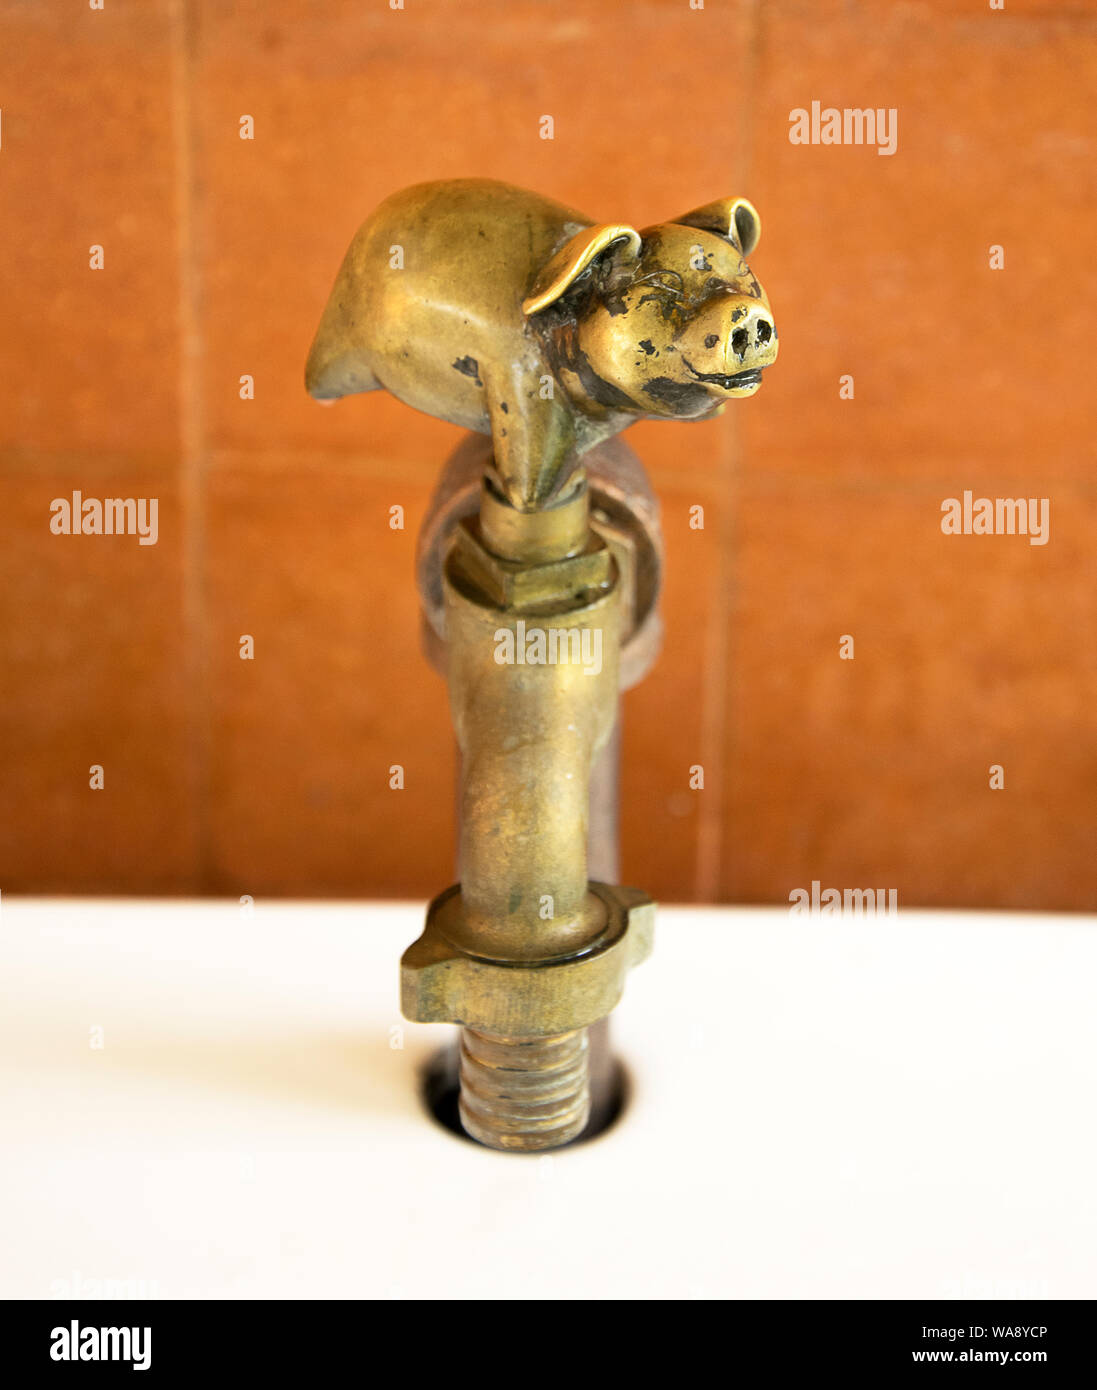 Old style faucet brass pig Stock Photo